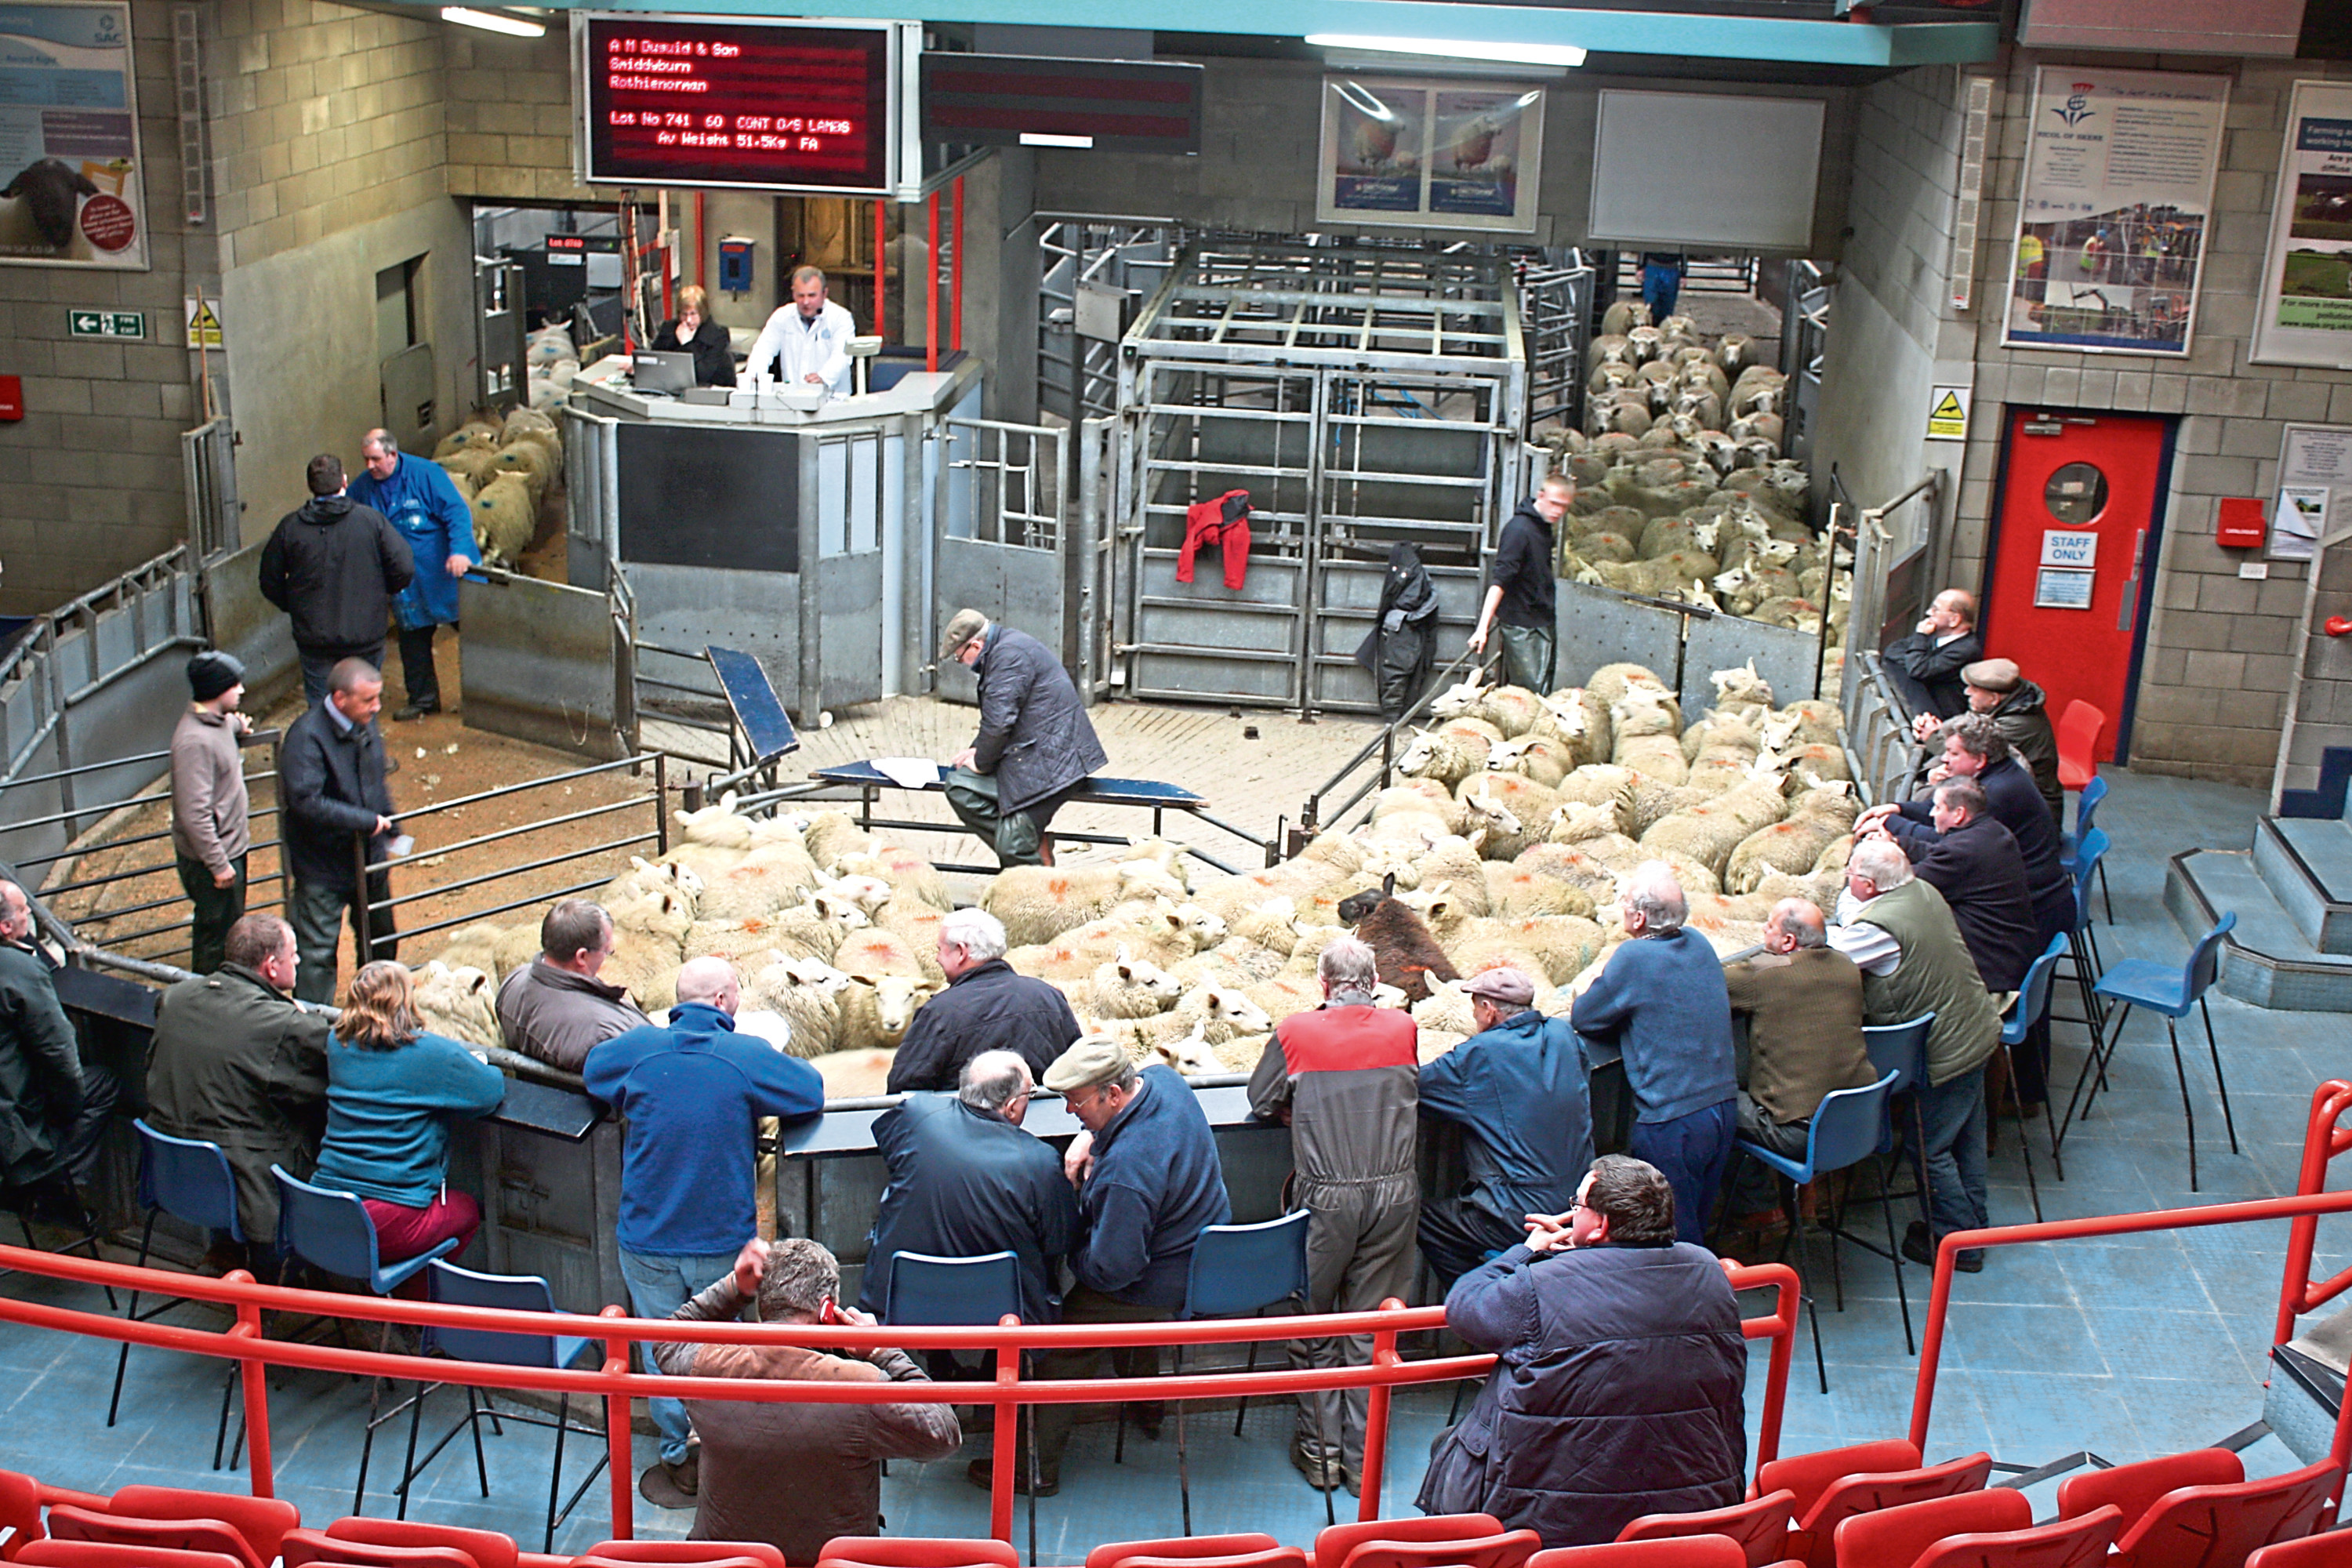 The rules concern the ageing of sheep before slaughter.